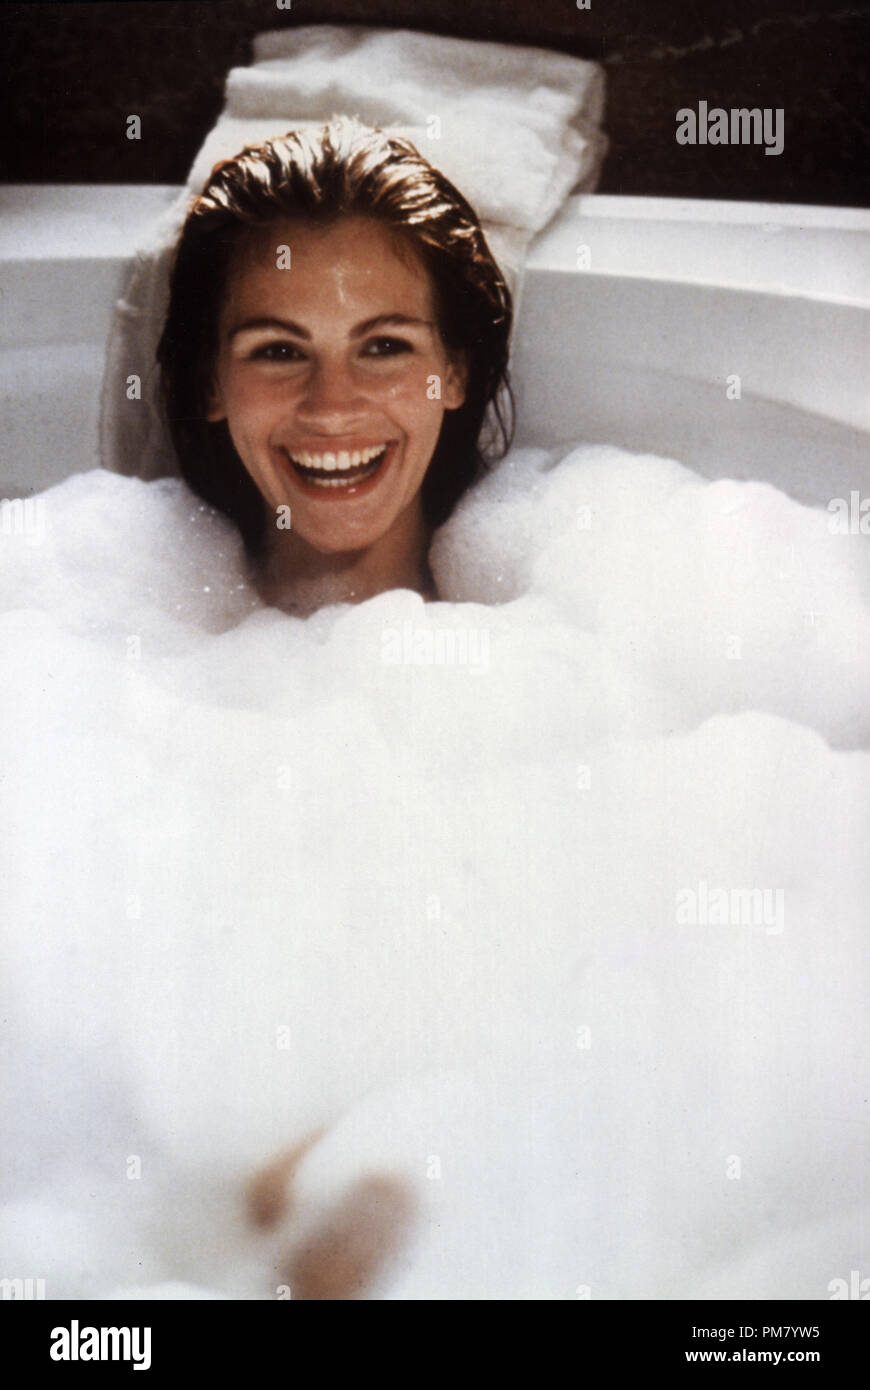 Film still or Publicity still from 'Pretty Woman' Julia Roberts © 1990 Touchstone All Rights Reserved   File Reference # 31571135THA  For Editorial Use Only Stock Photo